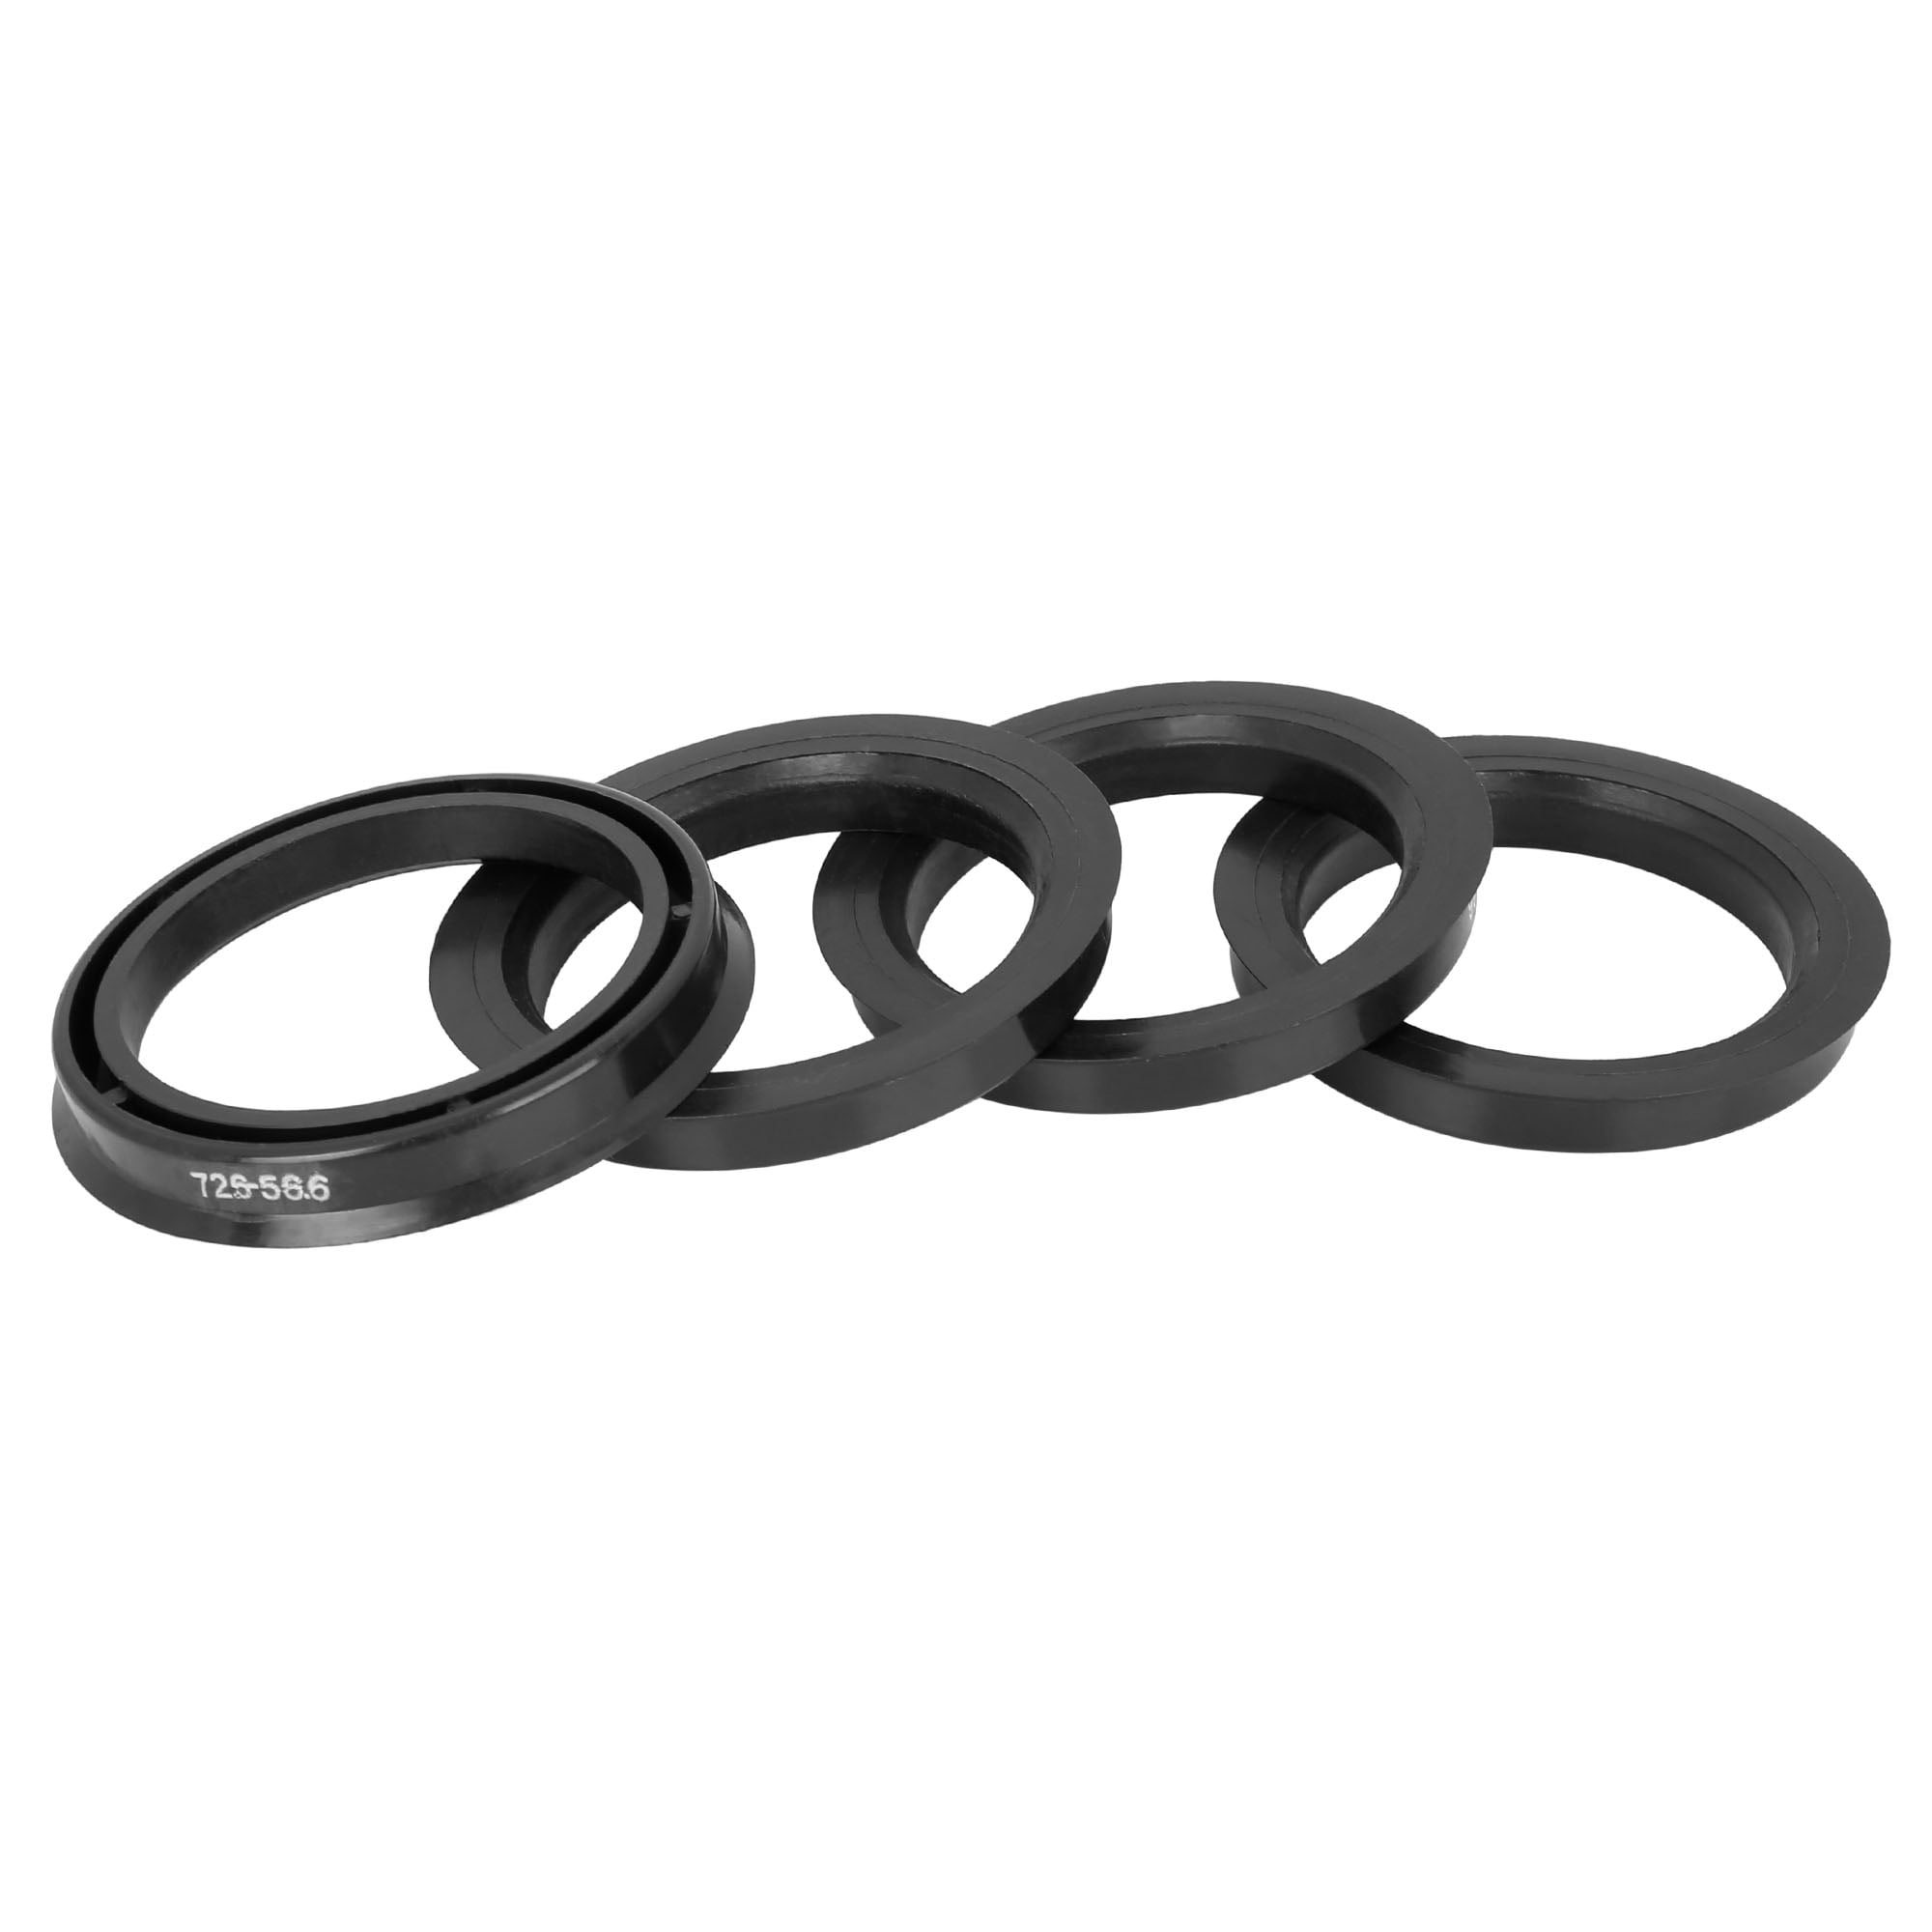 66.1 mm 4PC Hub Centric Rings 72.6mm to 66.1mmHubcentric Ring 72.6 mm 